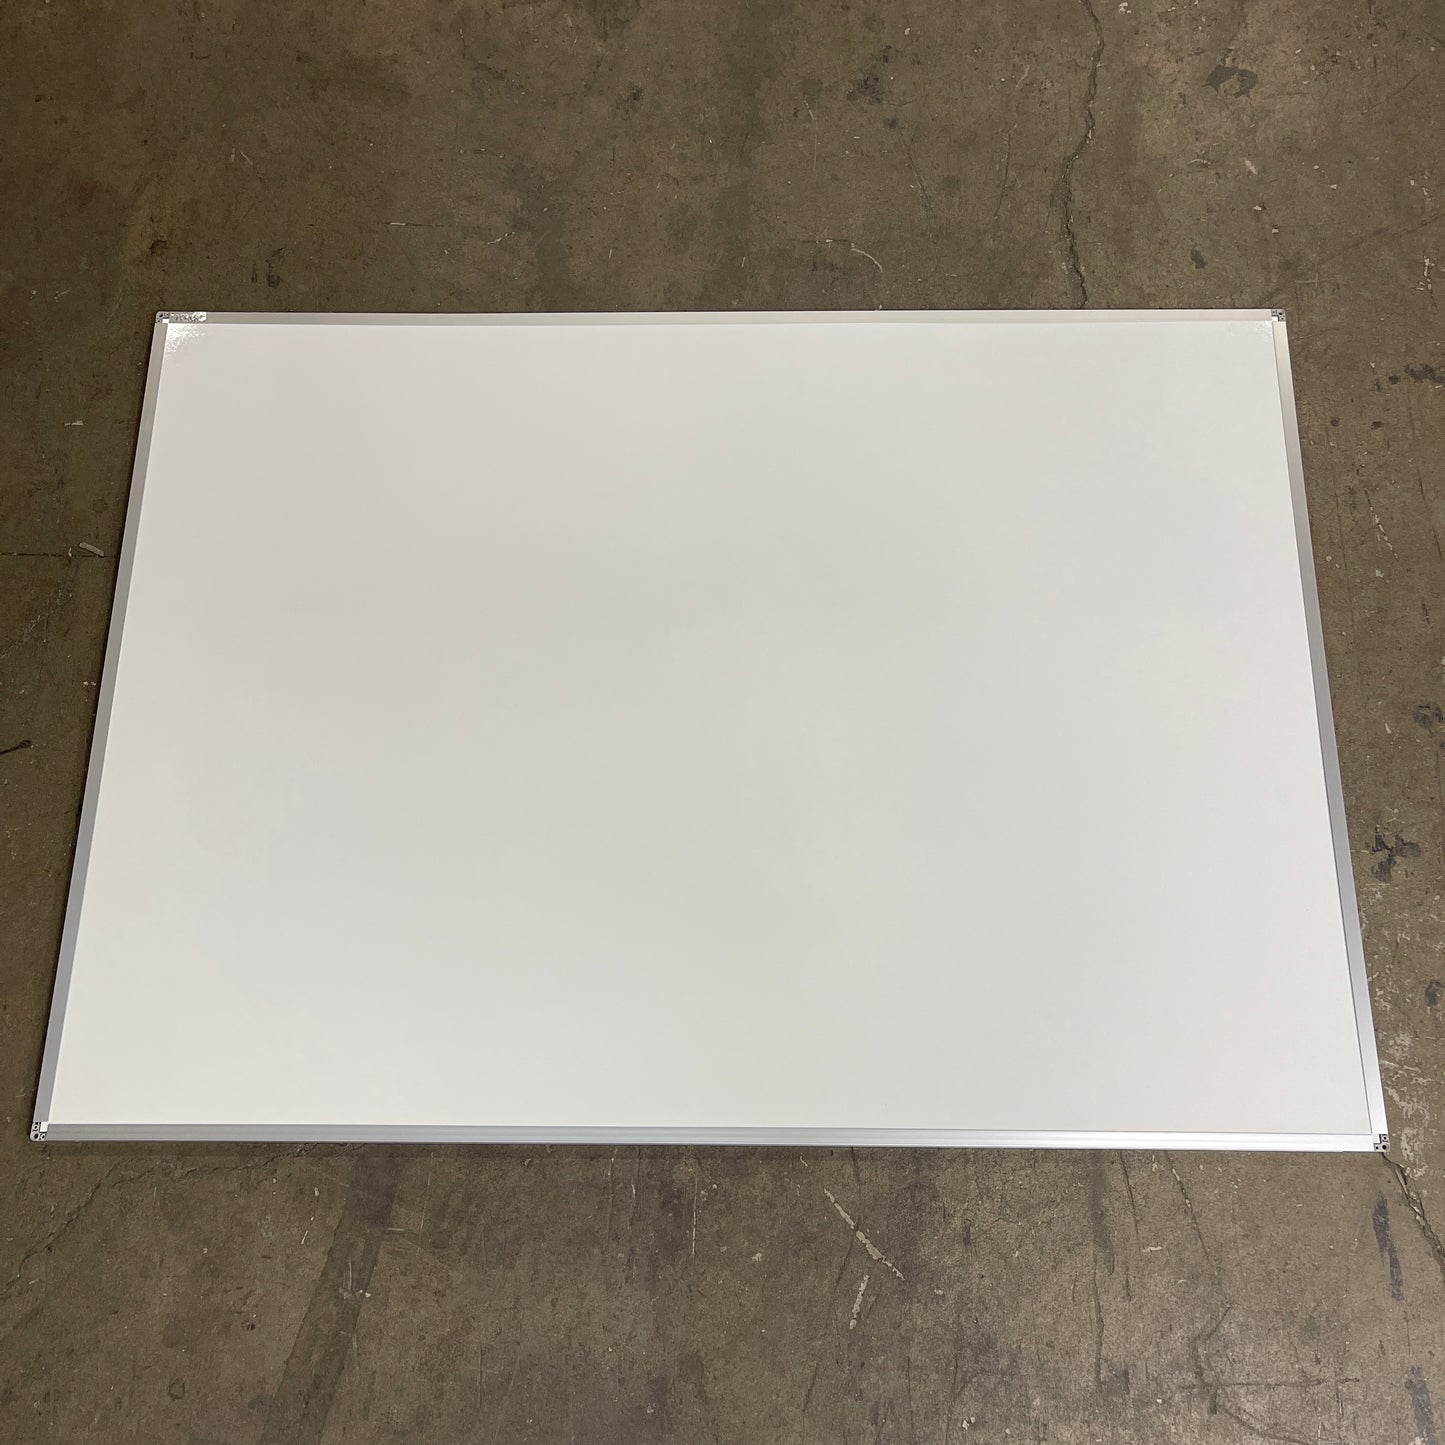 QUARTET Dry Erase Board Wall Mounted 85357N Silver/White 36x48 (new)